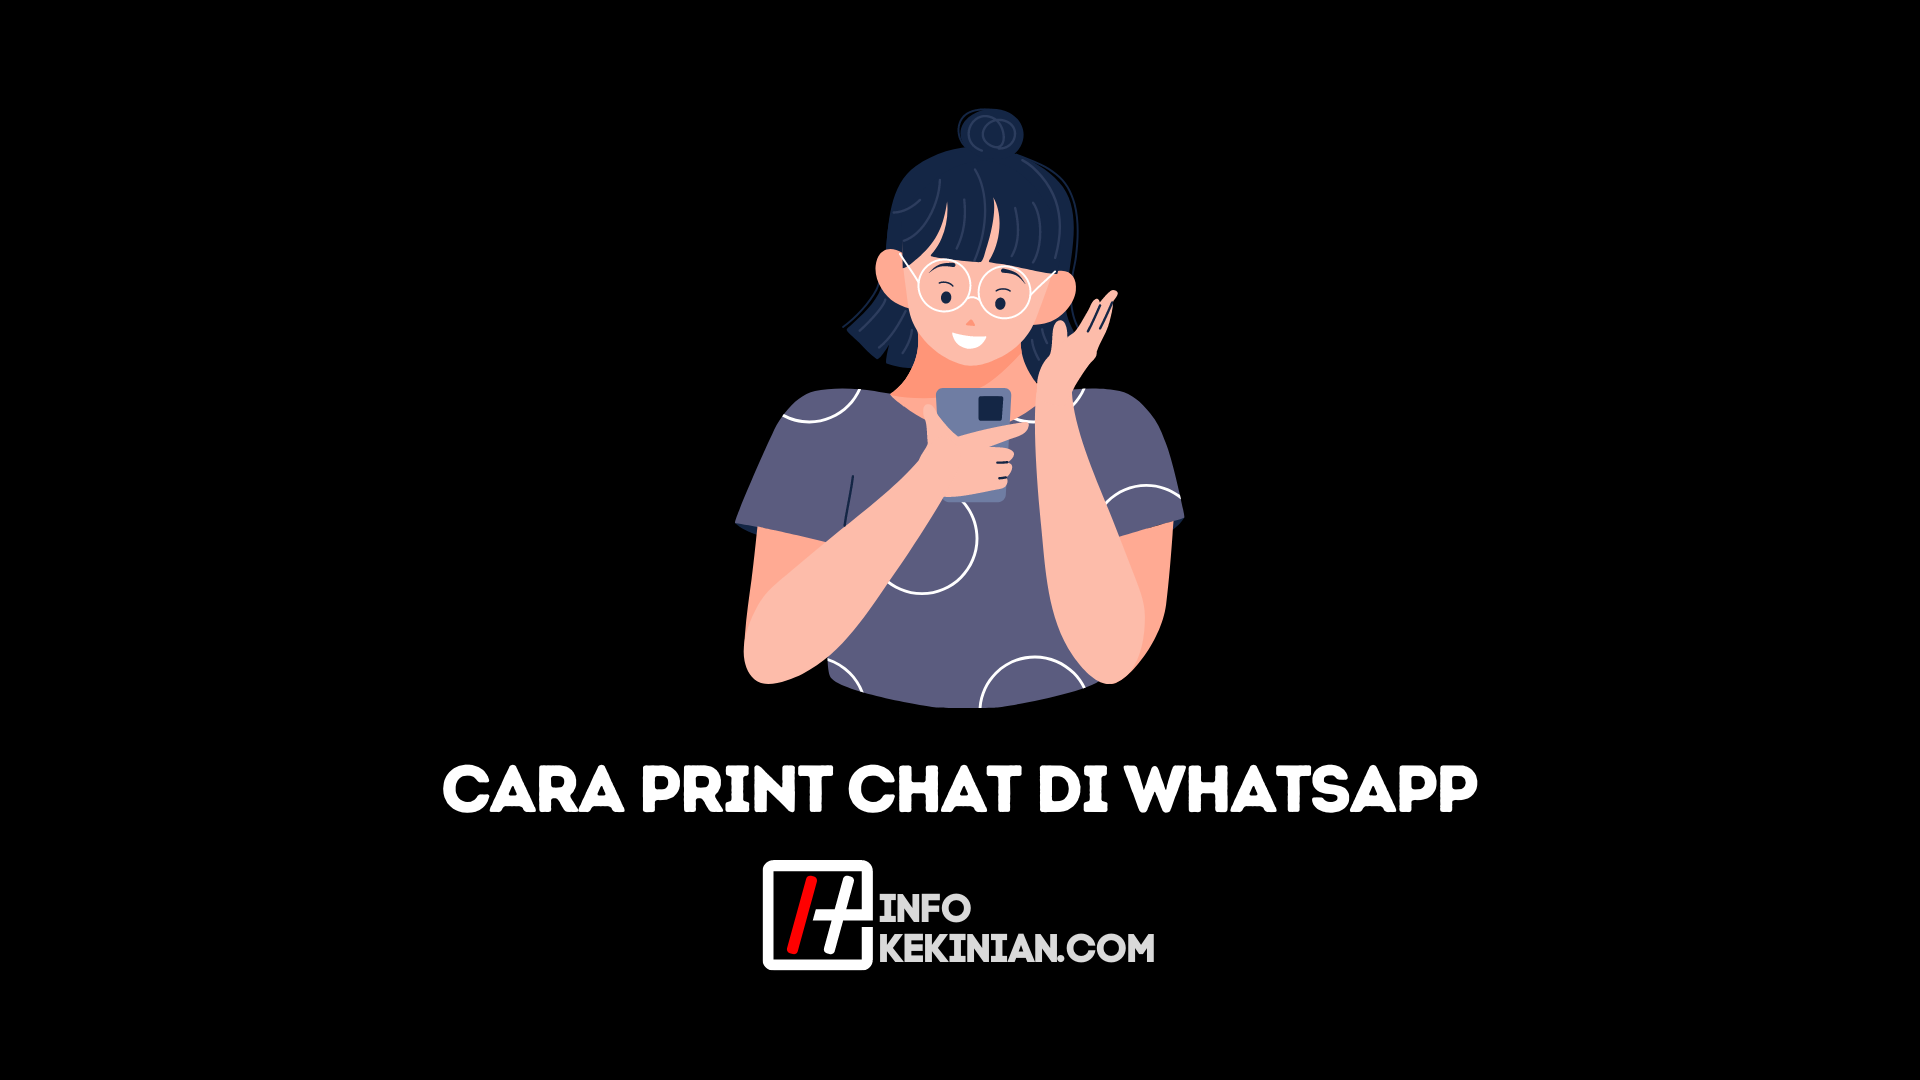 List of How to Print WhatsApp Chats